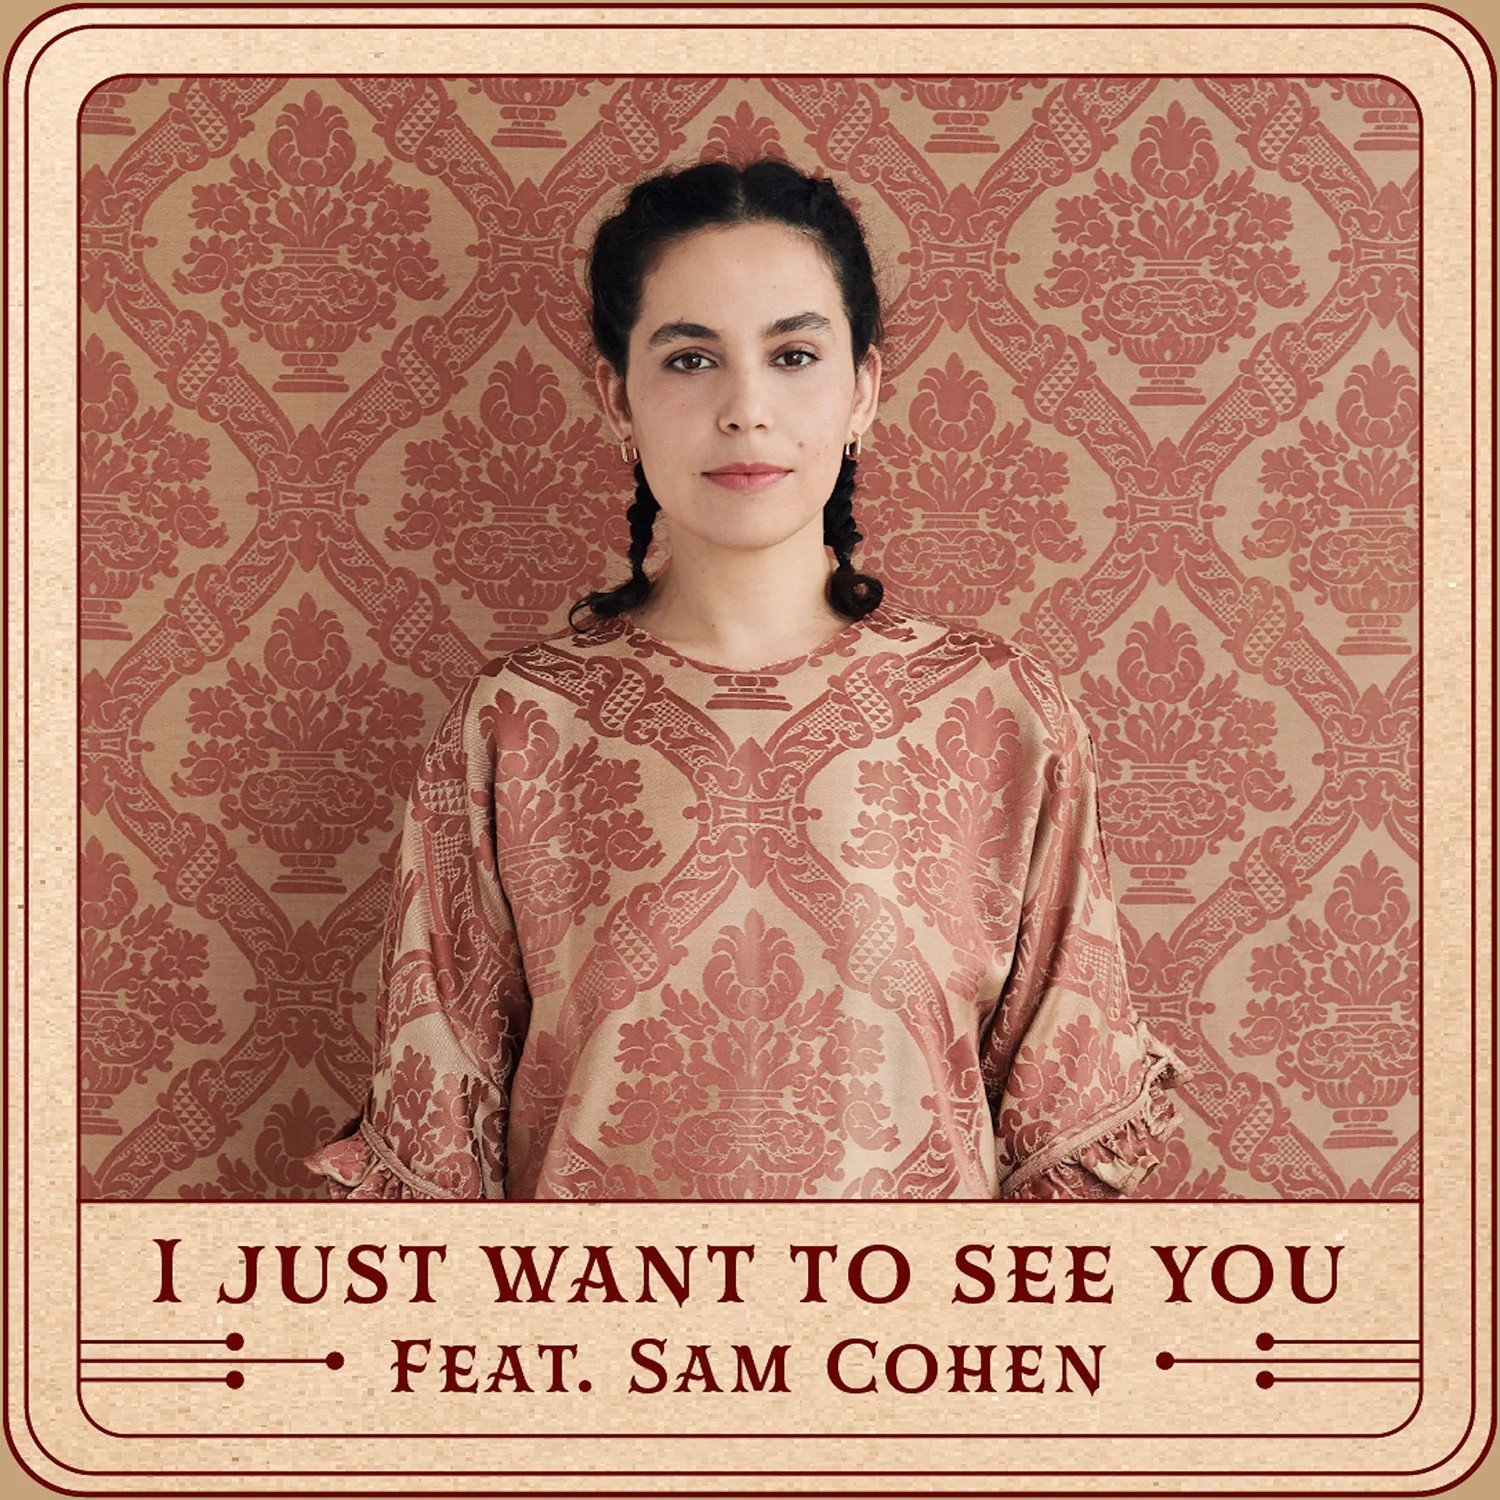 Ella Ronen “I Just Want to See You” (feat. Sam Cohen) single artwork